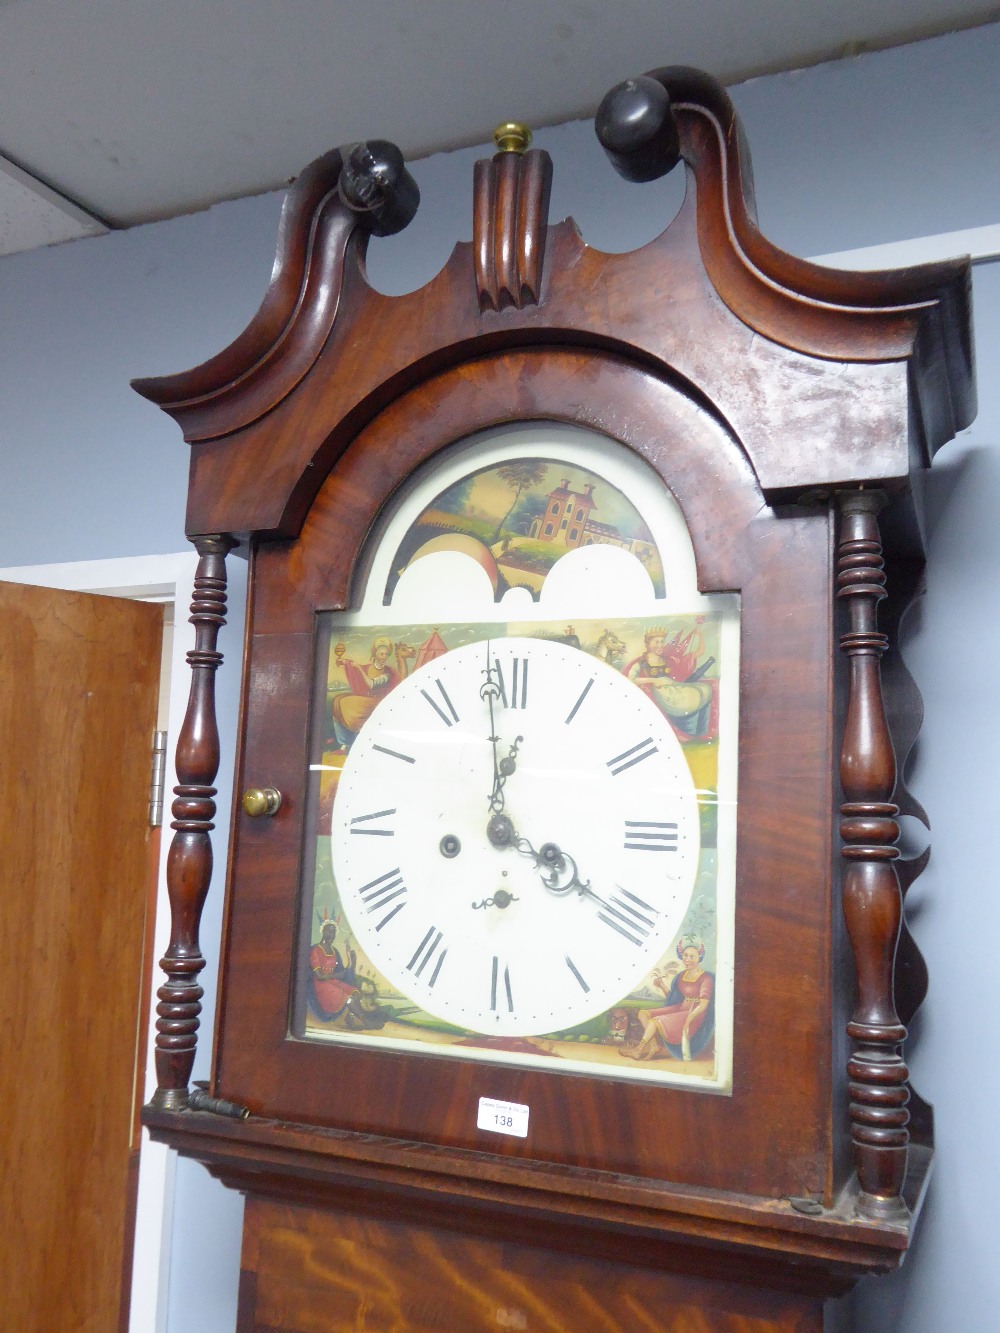 NINETEENTH CENTURY FIGURED MAHOGANY LONGCASE CLOCK WITH ROLLING MOON PHASE, the 14" painted dial